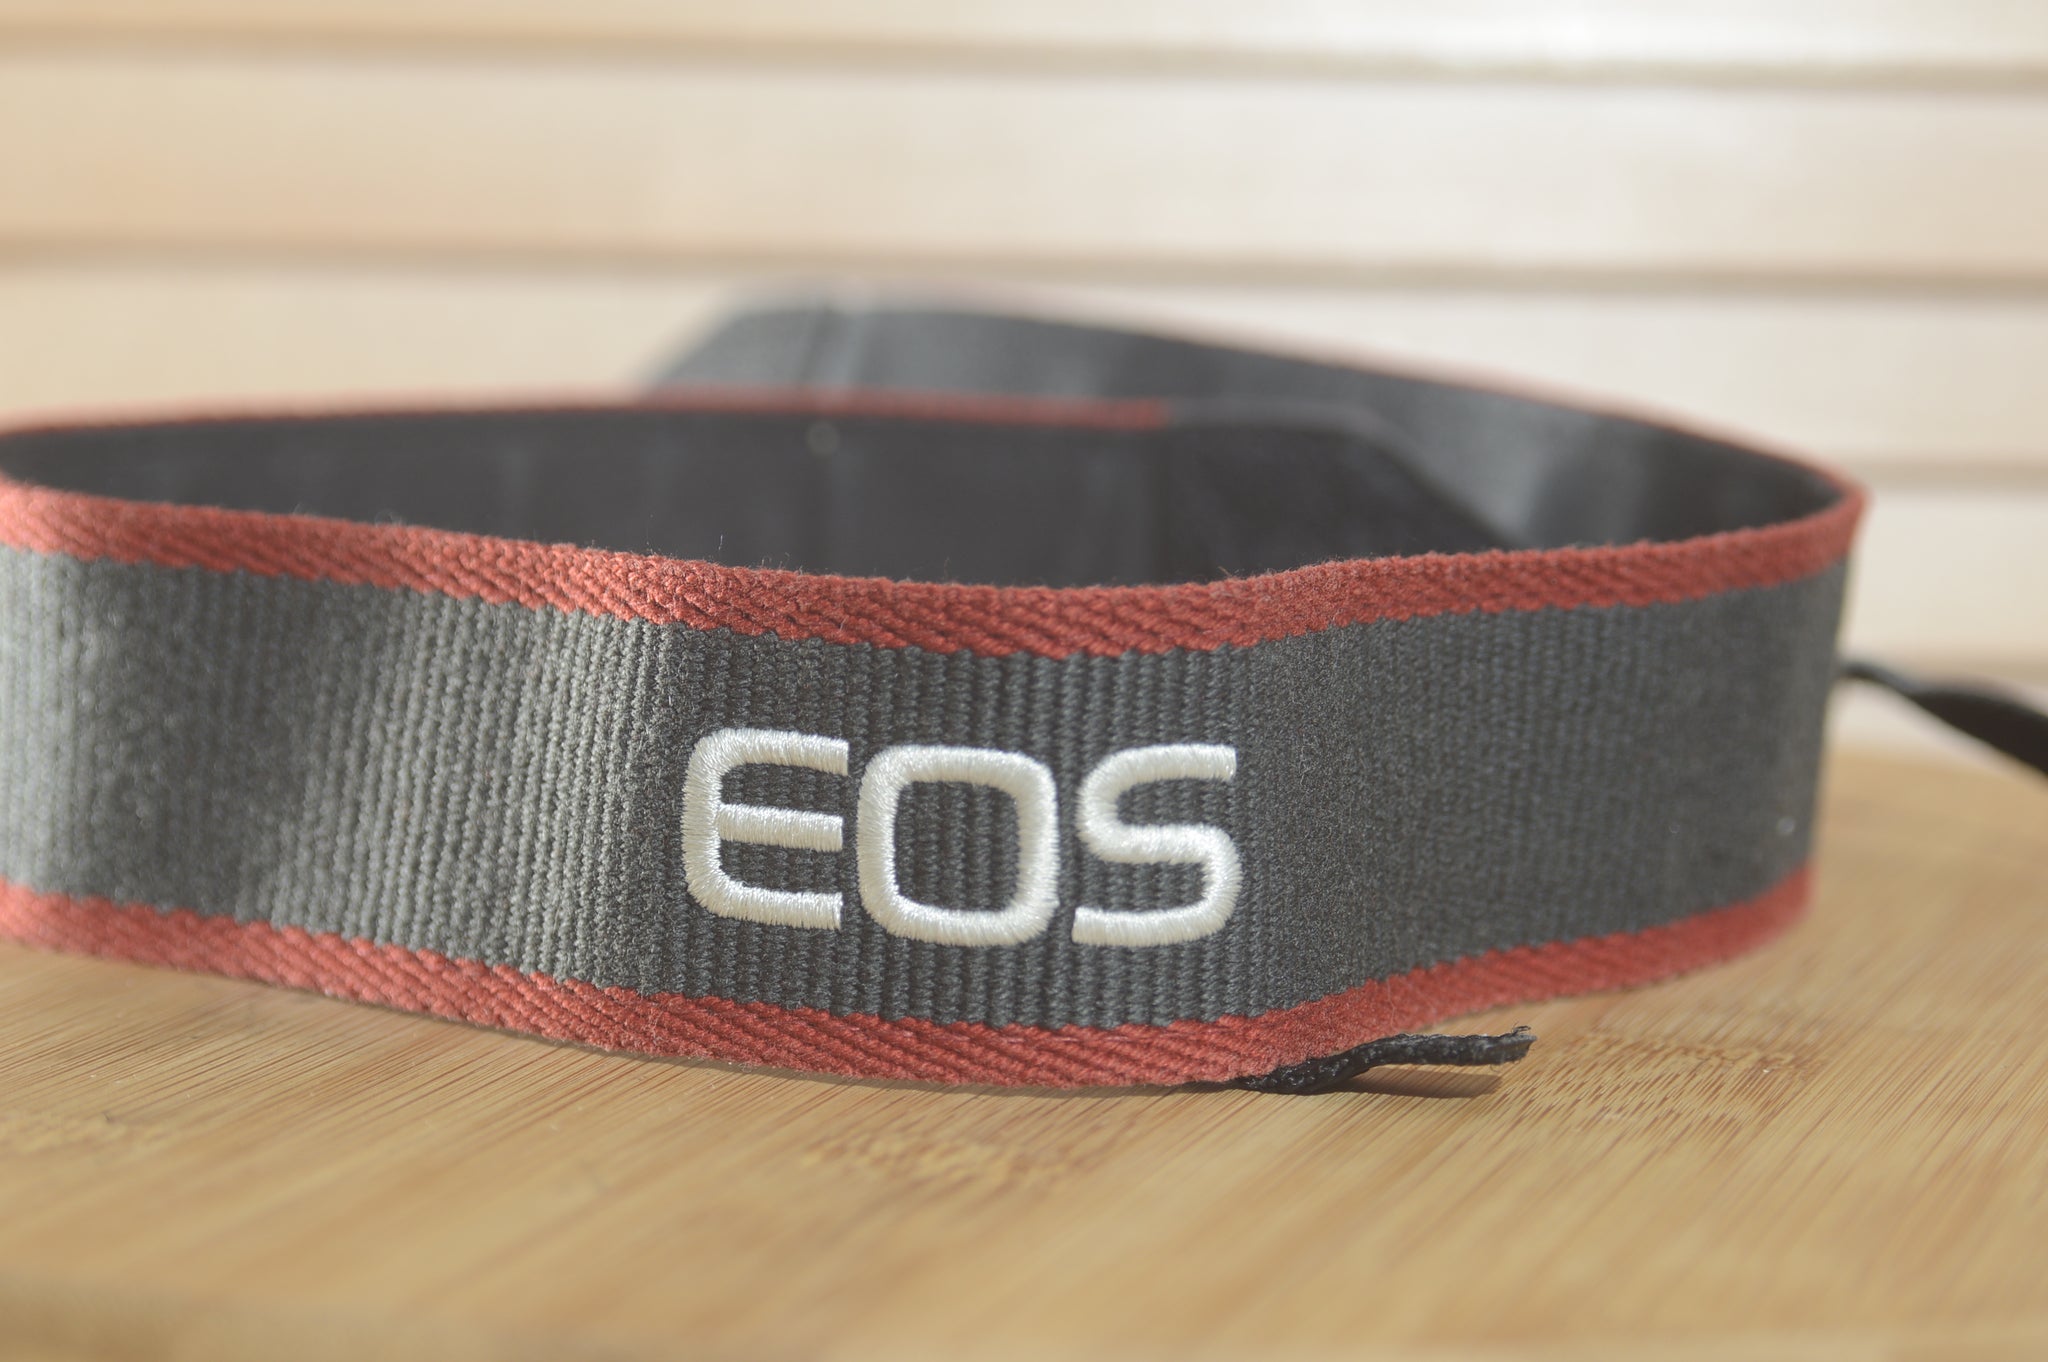 Black and Red Canon EOS Digital strap. A lovely addition to your Canon set up. - RewindCameras quality vintage cameras, fully tested and serviced